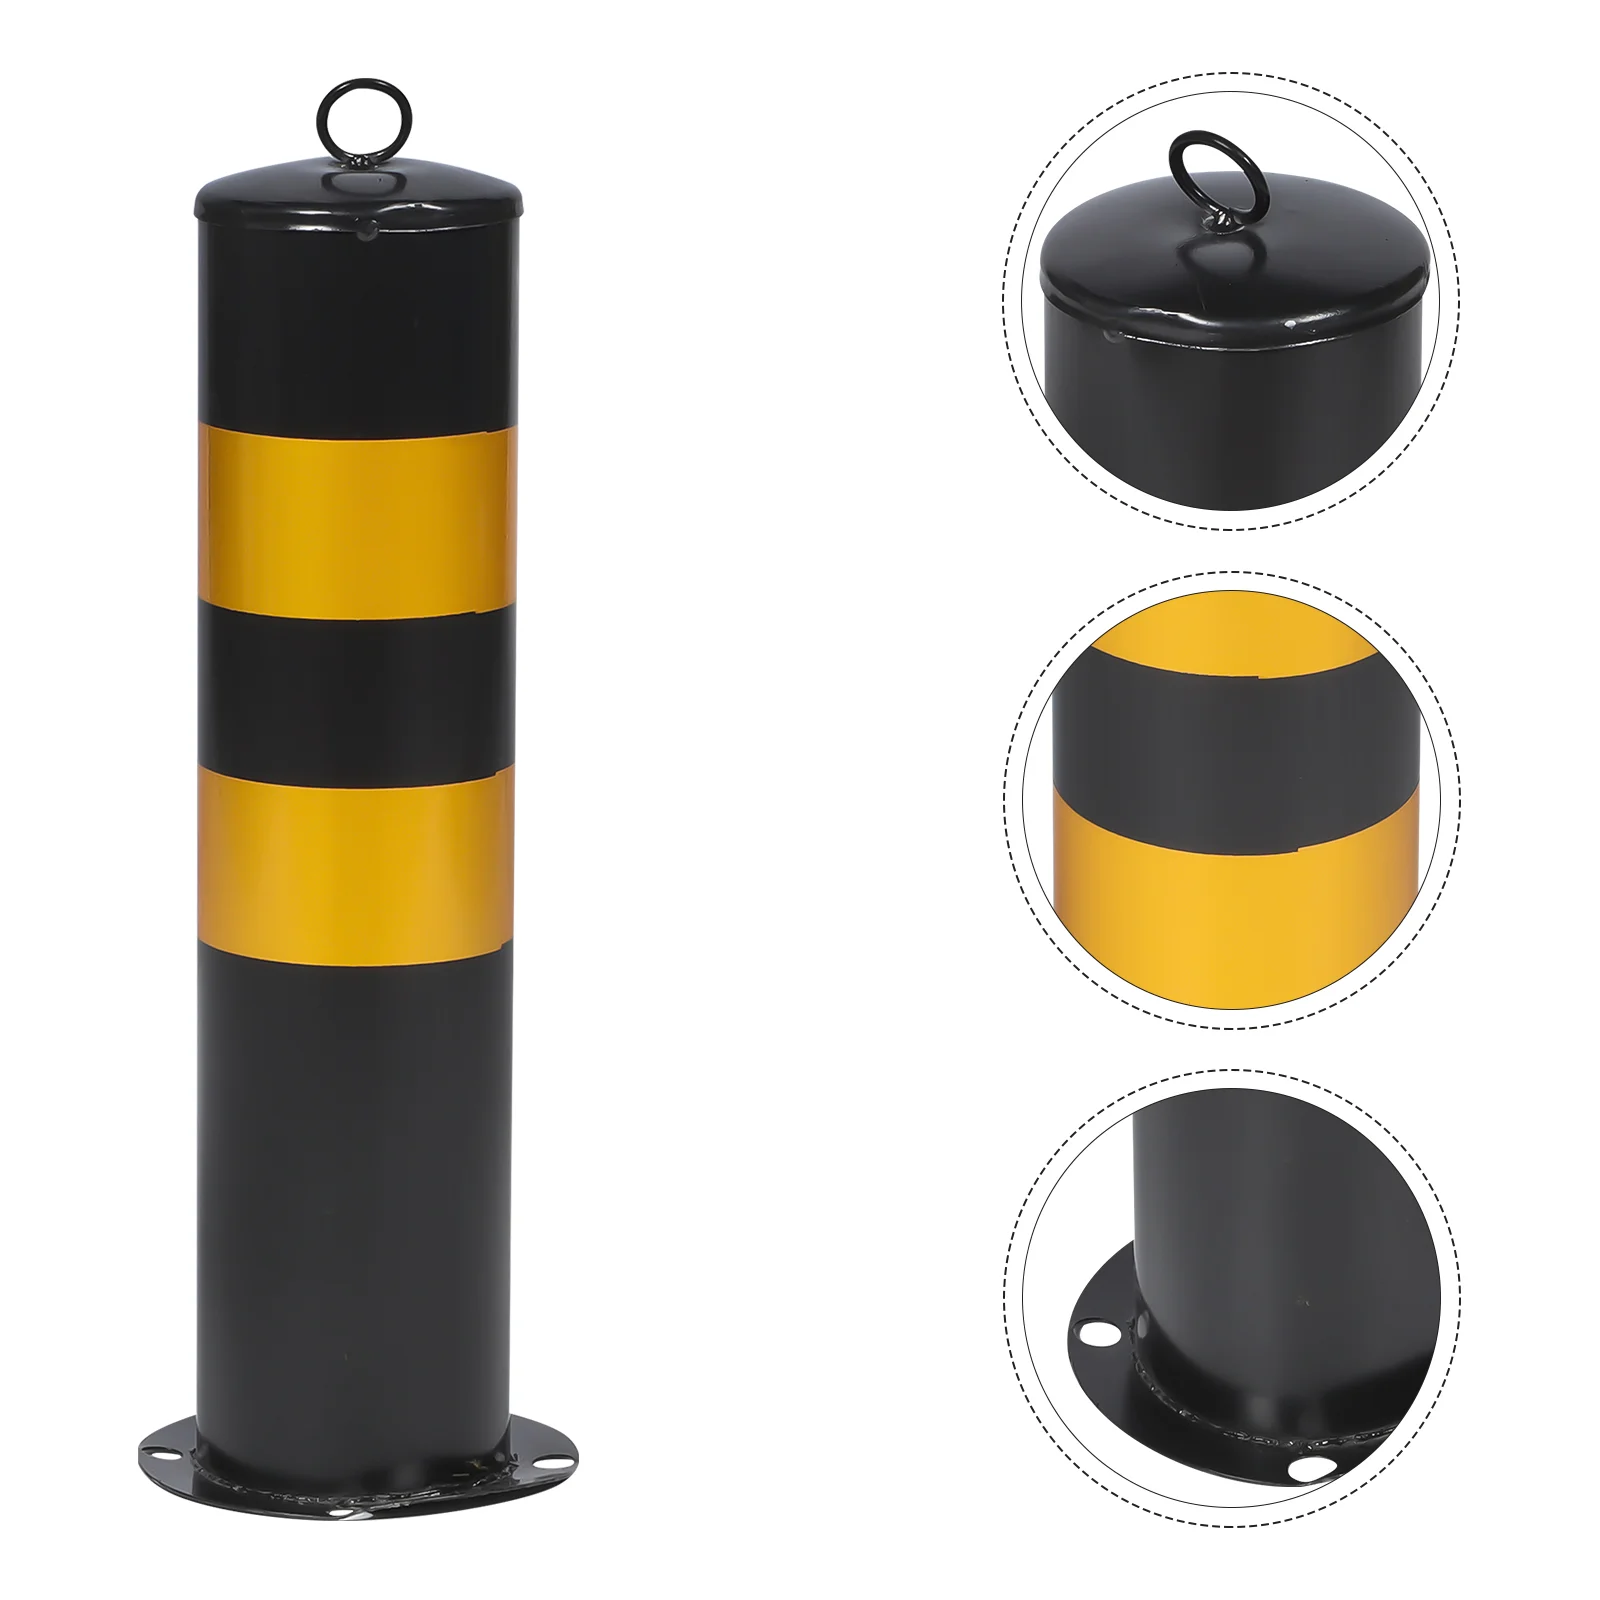 Safety Traffic Bollard Post Parking Driveway Barrier Lot Column Cones Bollards Pile Fence Gate Delineator Guard High Stopper new pet barrier fences portable folding breathable mesh dog gate pet separation guard isolated fence dogs baby safety fence